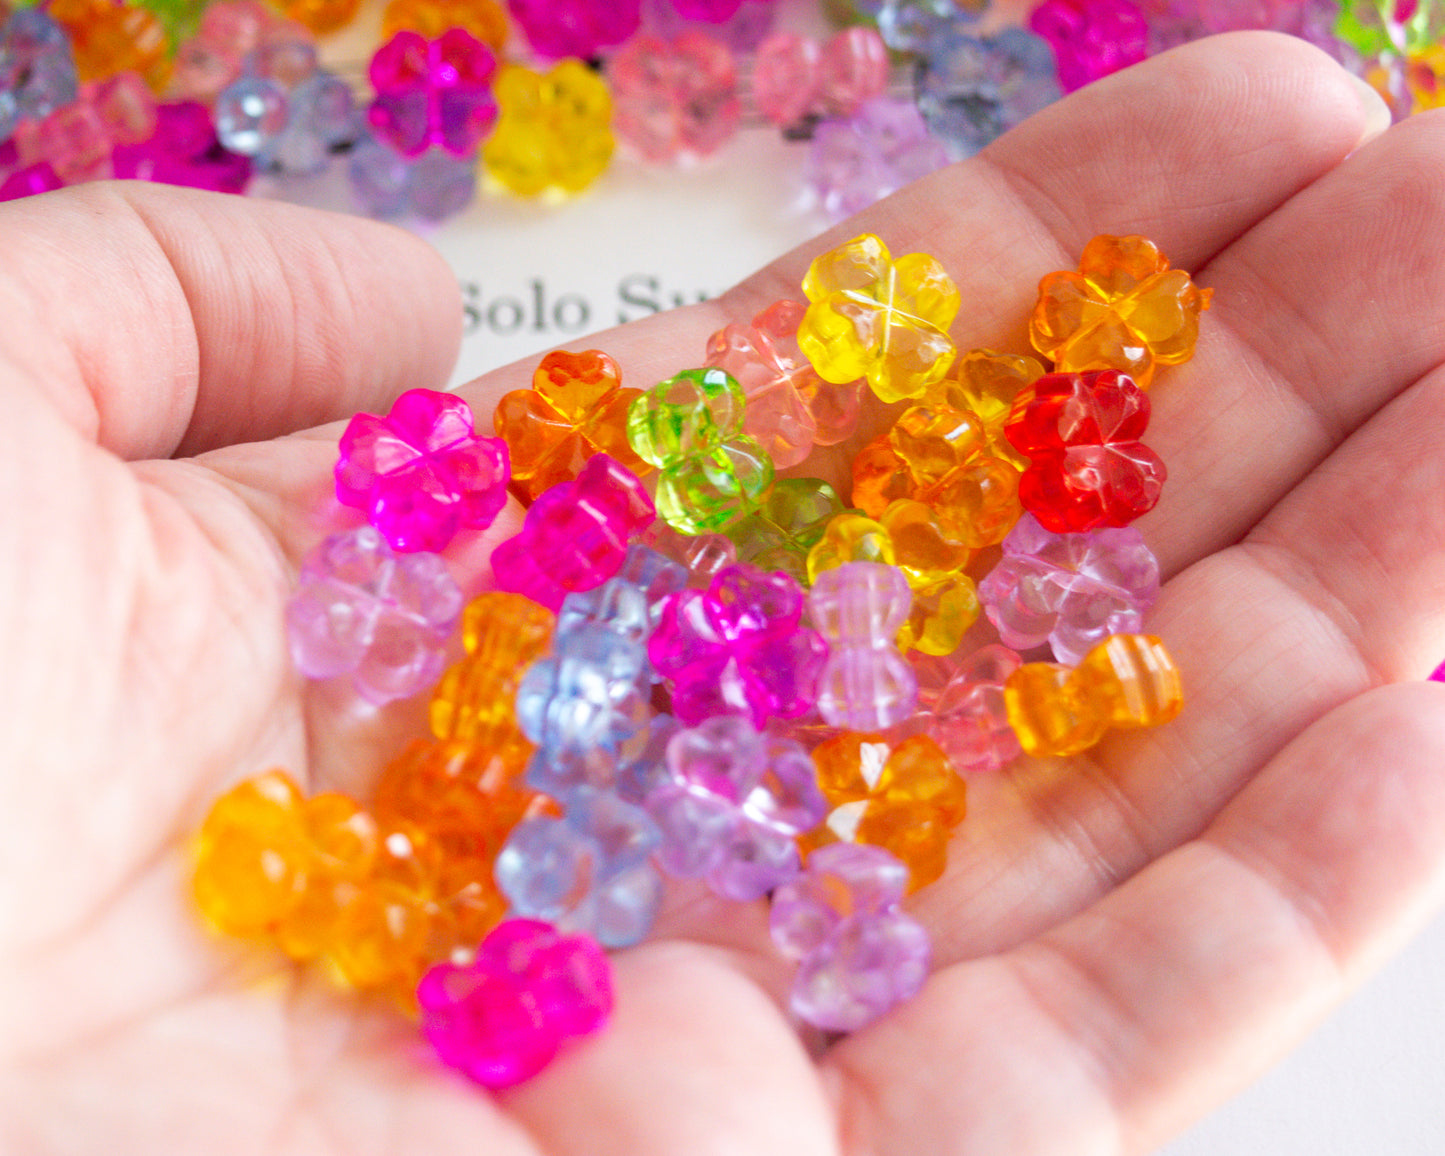 10mm Faceted Flower Beads in Transparent Acrylic, Four-Leaf Clover Shape